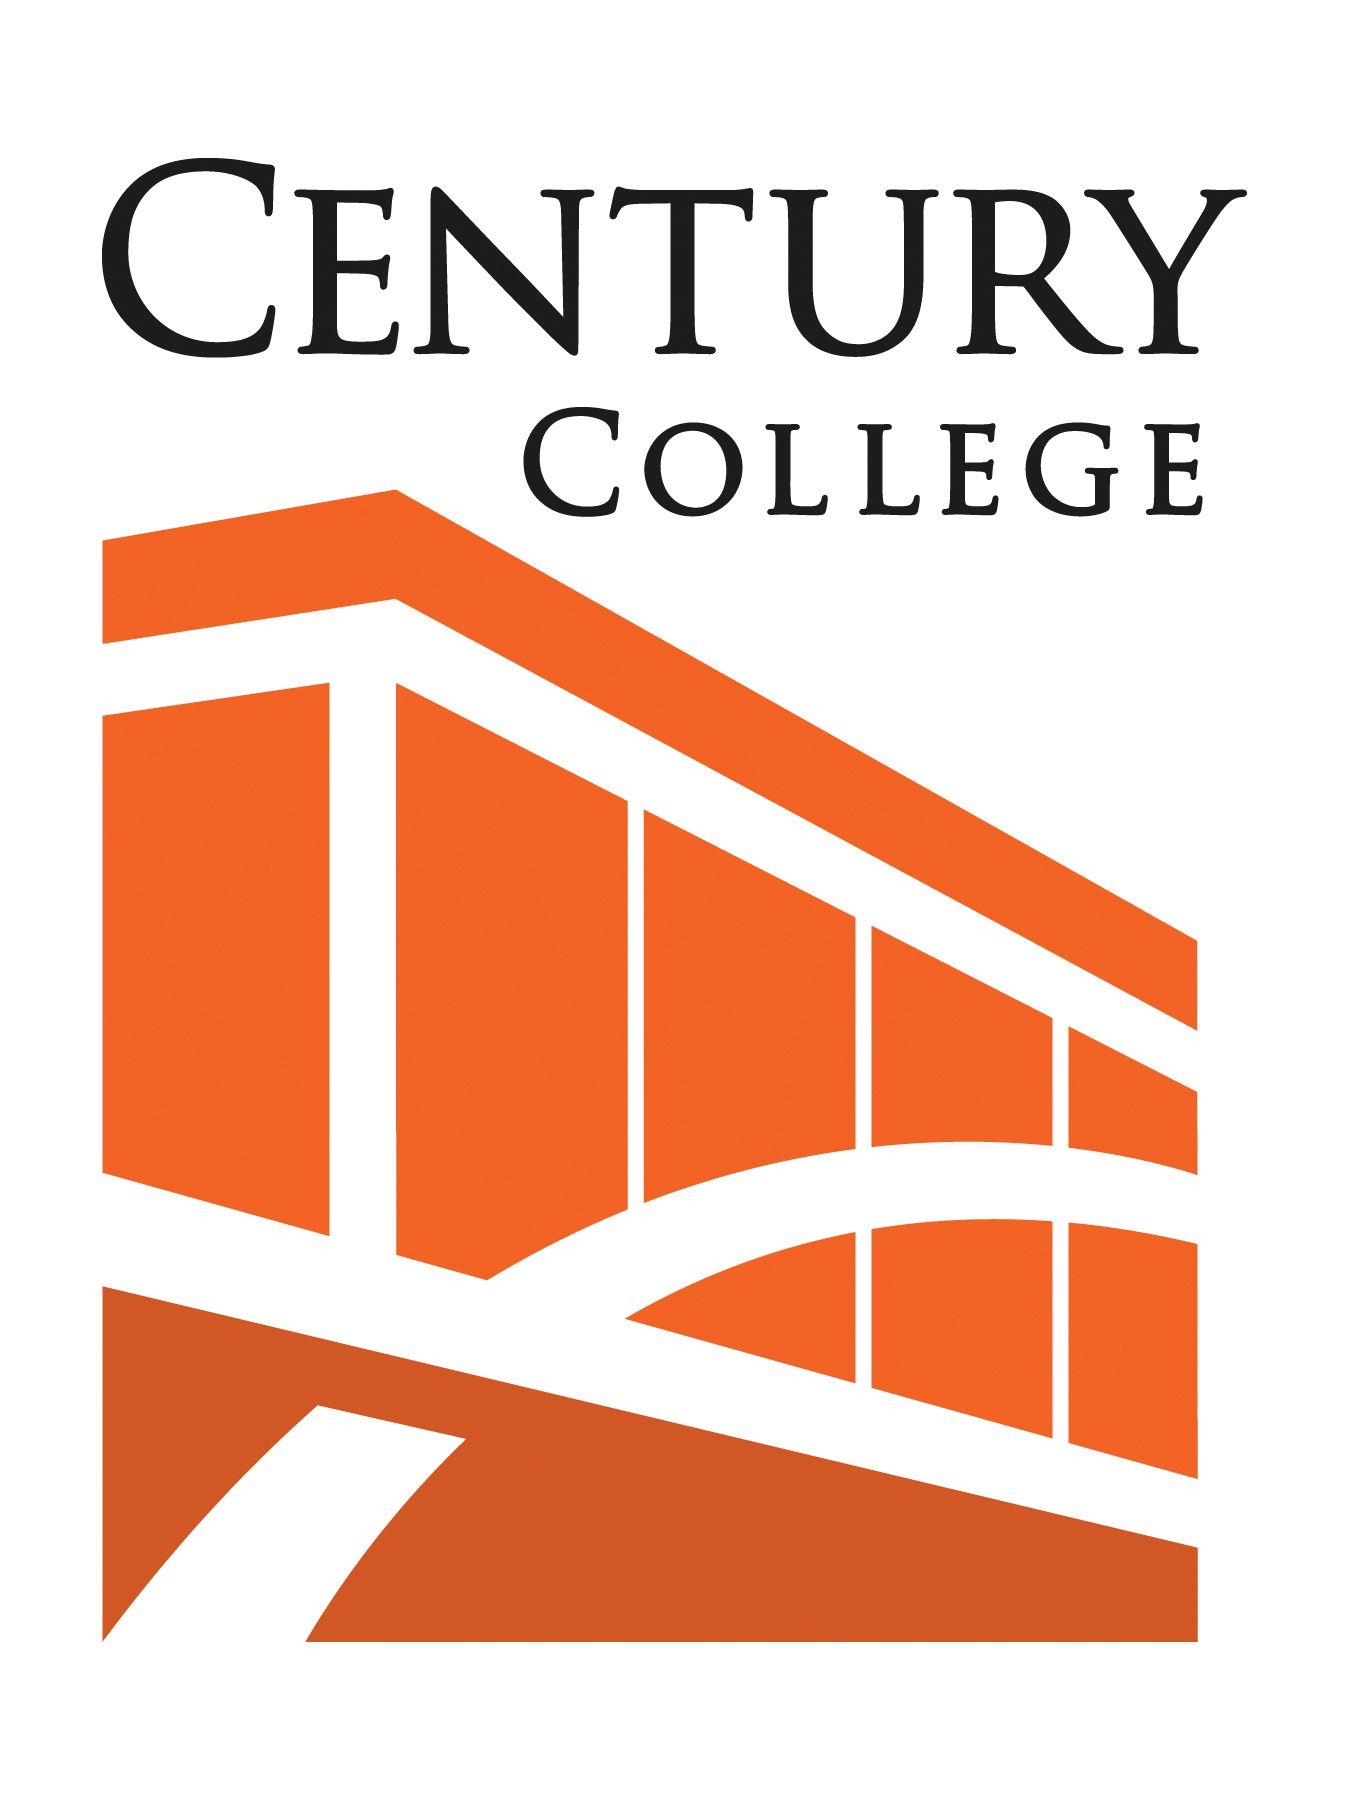 Century College Logo - Job Opportunities. Sorted by Job Title ascending